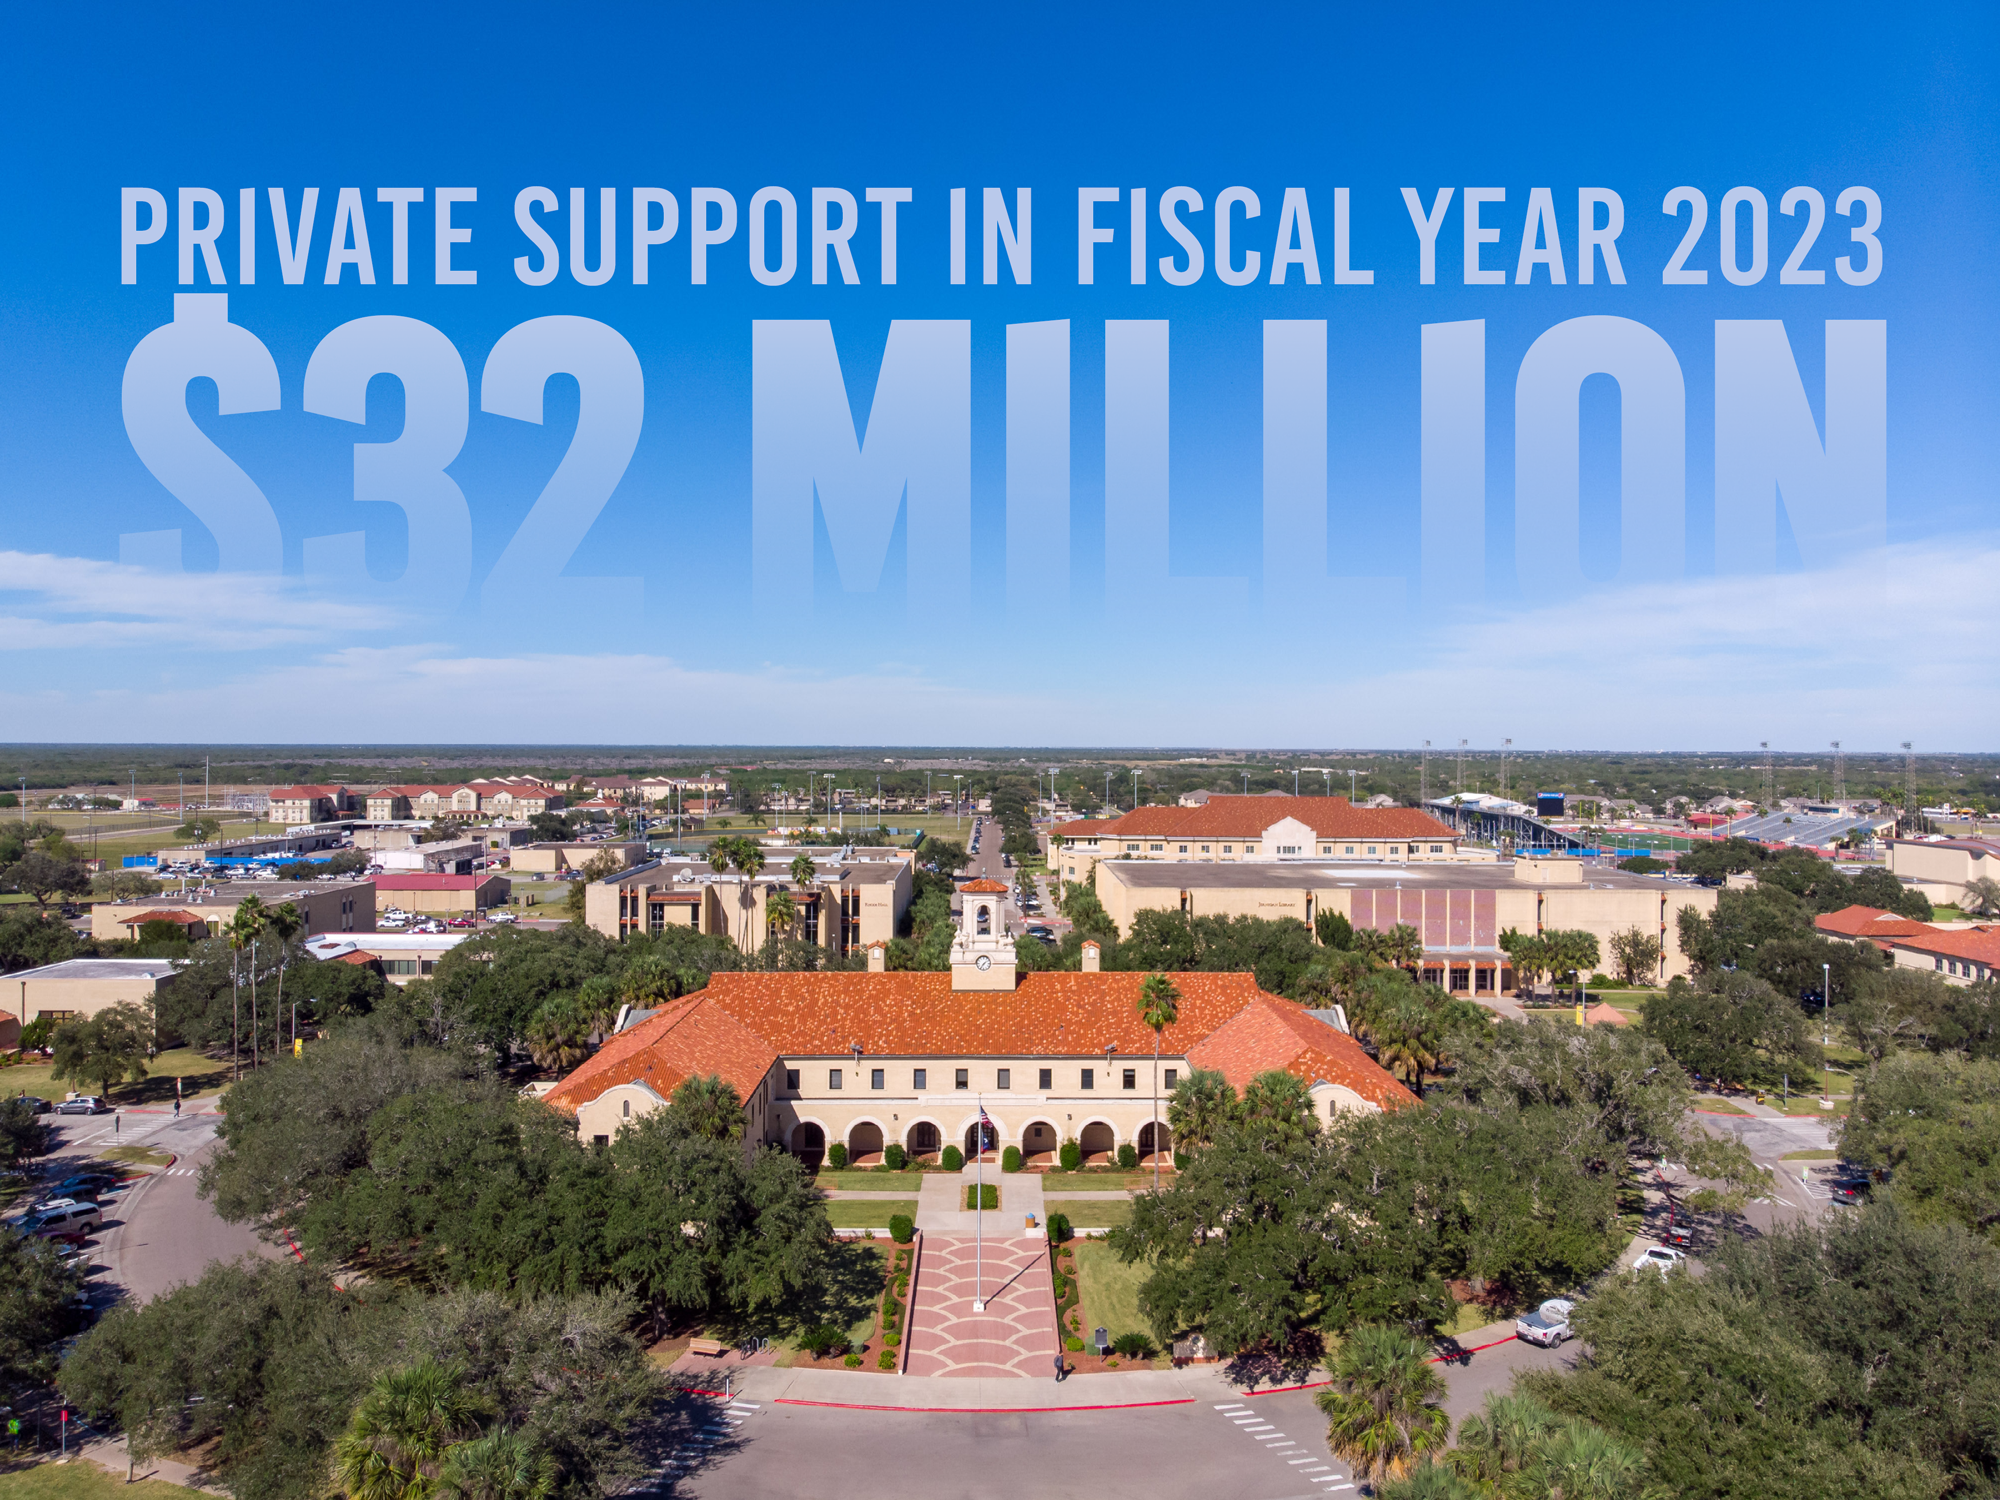 An aerial view of the TAMUK campus focusing on College Hall with writing overlaid on the image stating $32 million in private support in fiscal year 2023.